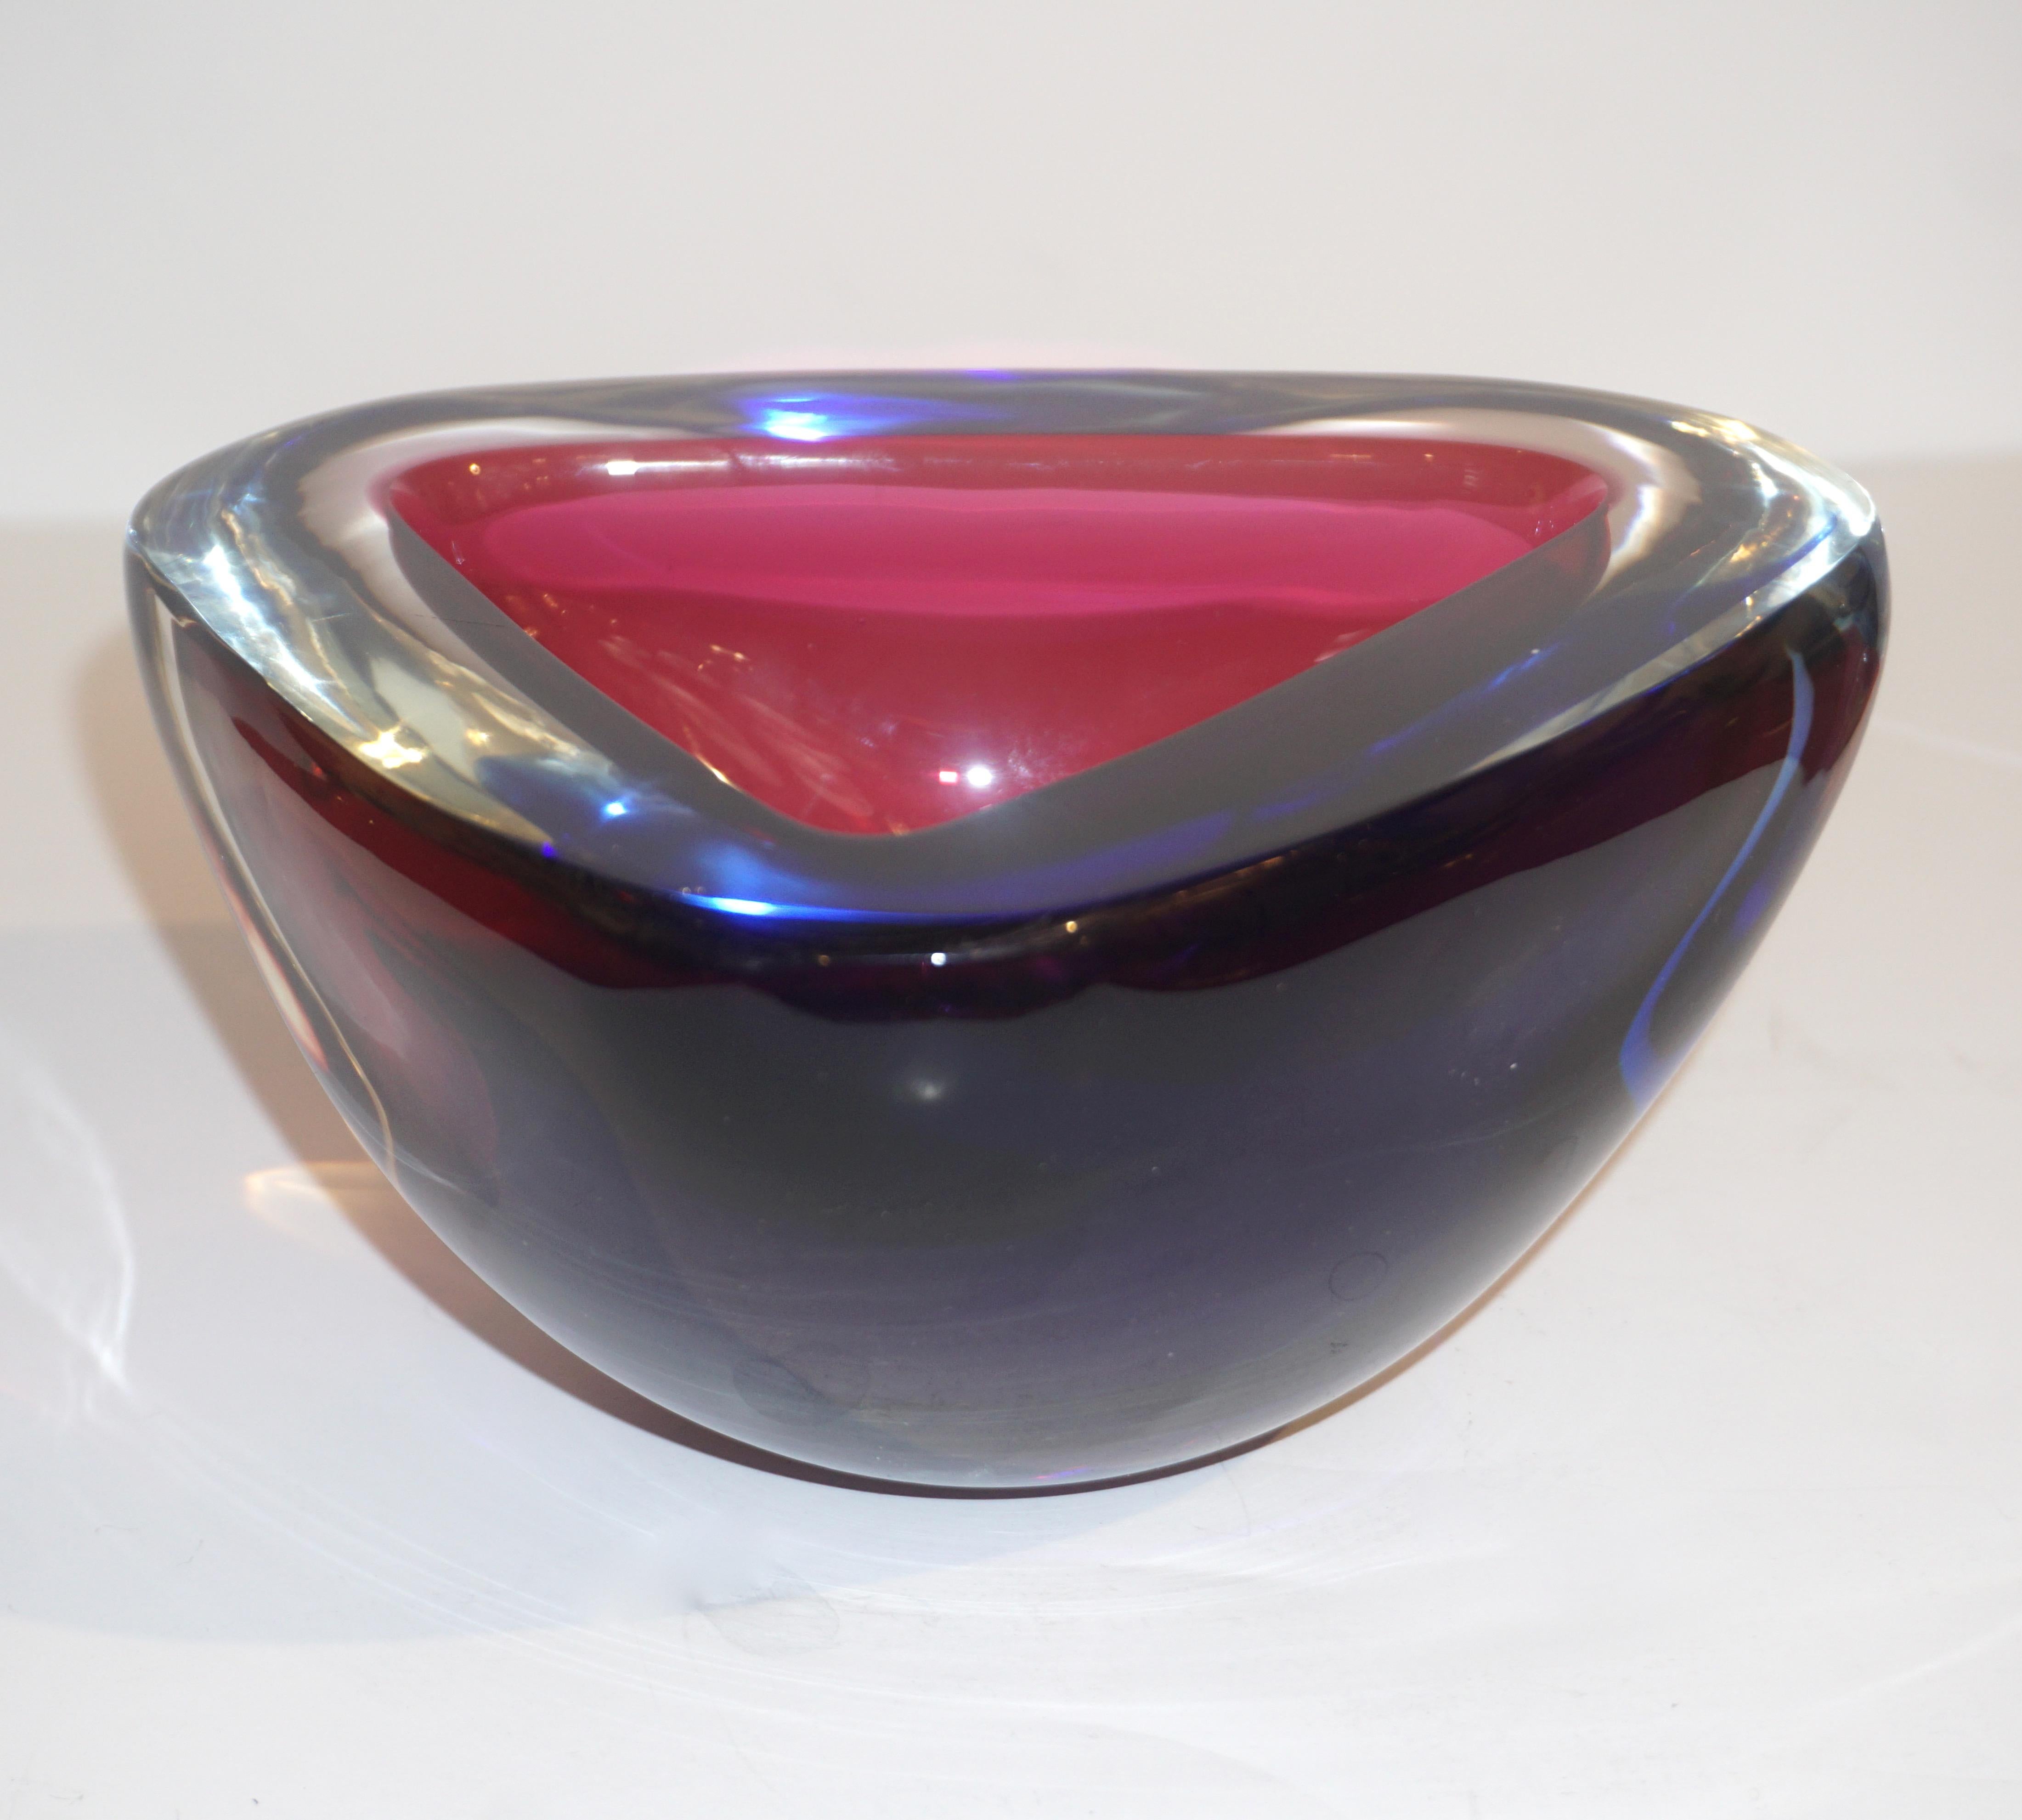 Vintage organic modern 1970s blown Murano glass bowl or catchall dish in magenta red and deep blue, signed by Venini, elegantly decorated in patch colors that catch the light and enhanced the shape with flat cut polished top. Also, available in two